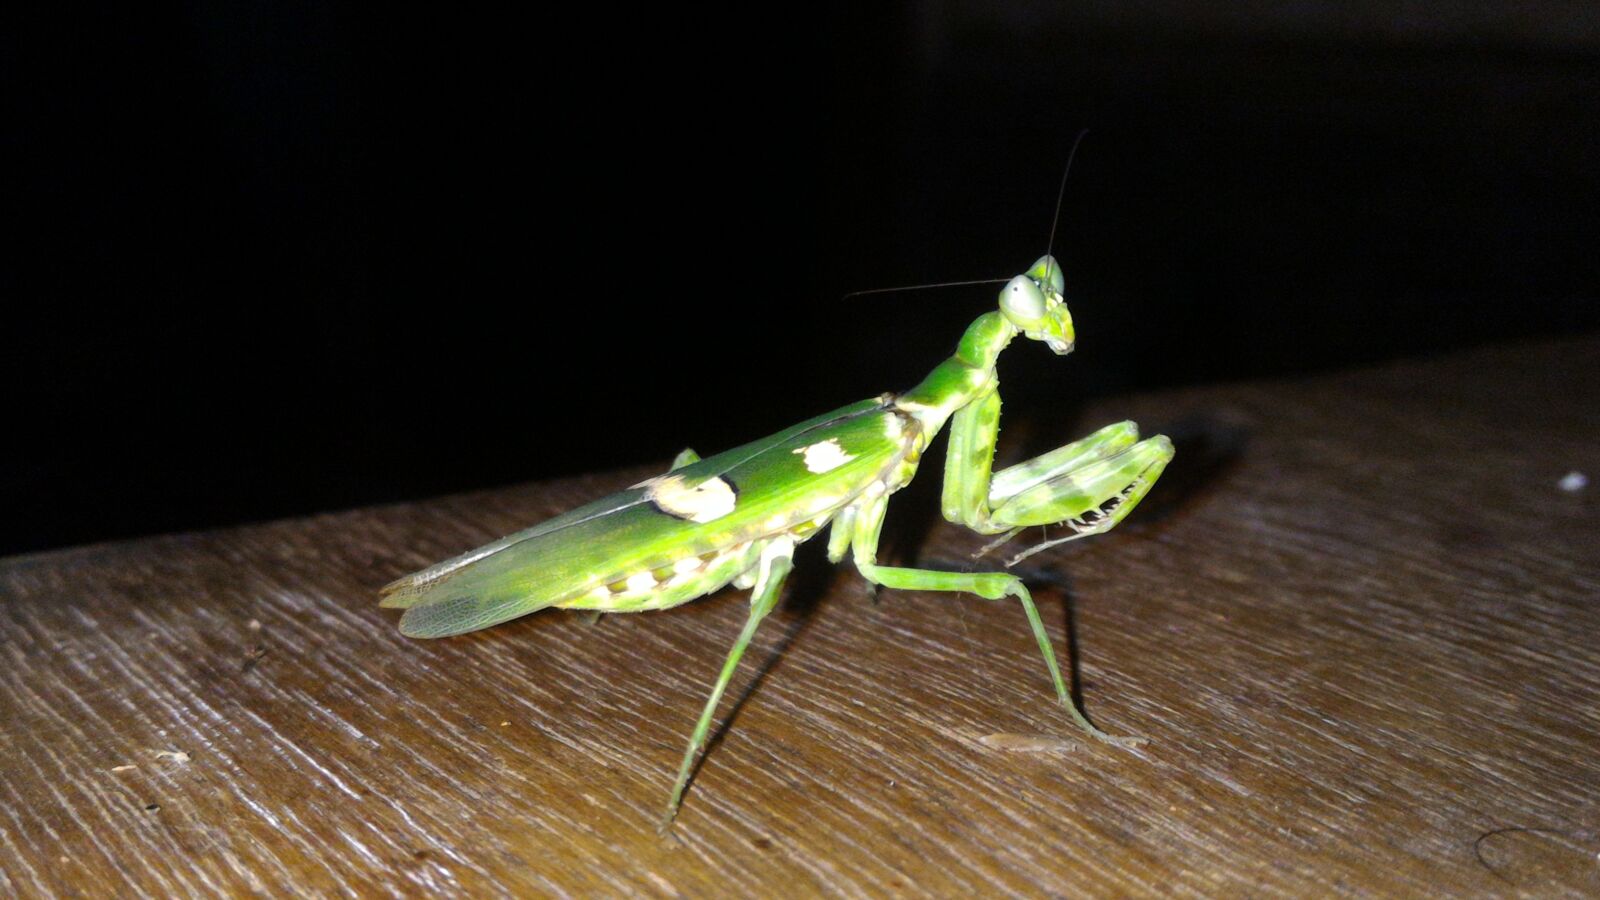 ASUS Z00AD sample photo. Caelifera, പുൽച്ചാടി, insect photography